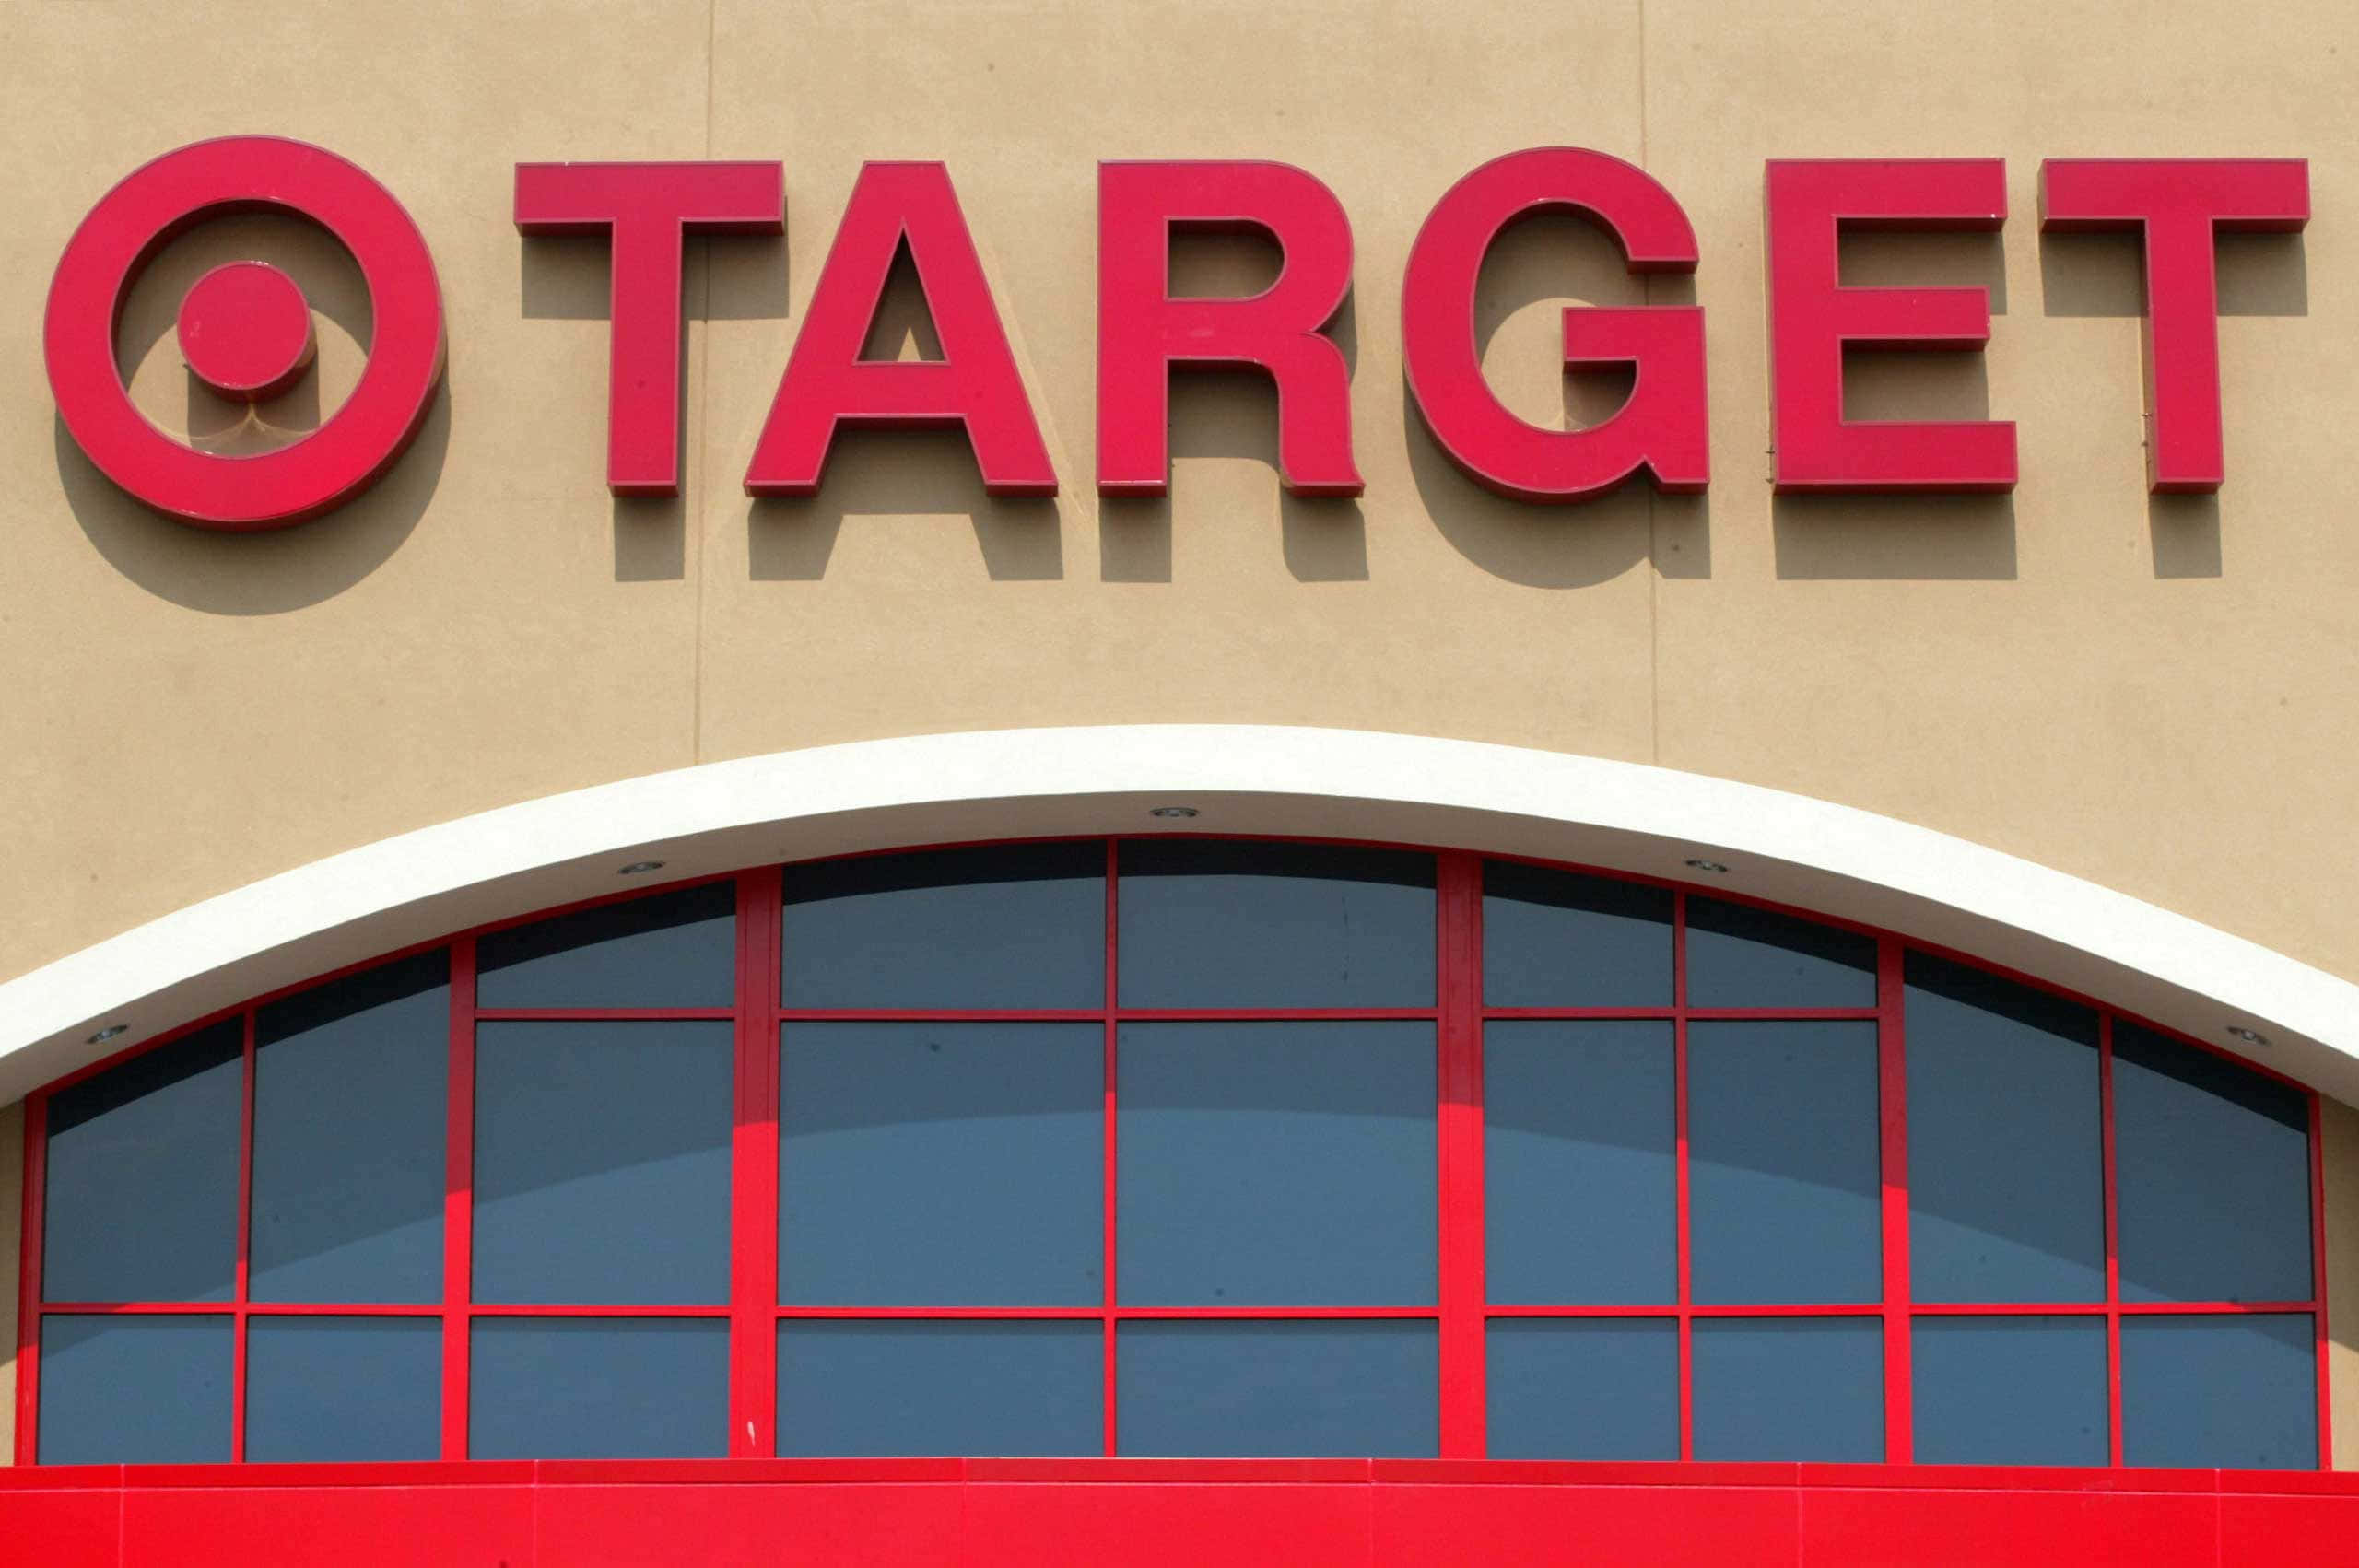 Shop All You Need at Target